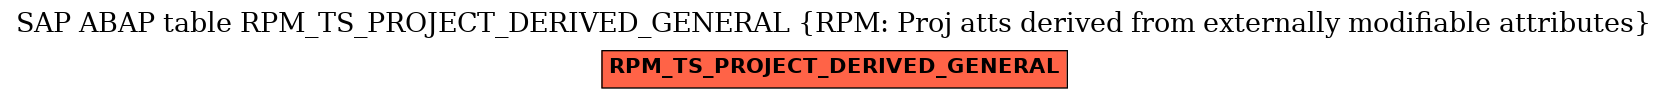 E-R Diagram for table RPM_TS_PROJECT_DERIVED_GENERAL (RPM: Proj atts derived from externally modifiable attributes)